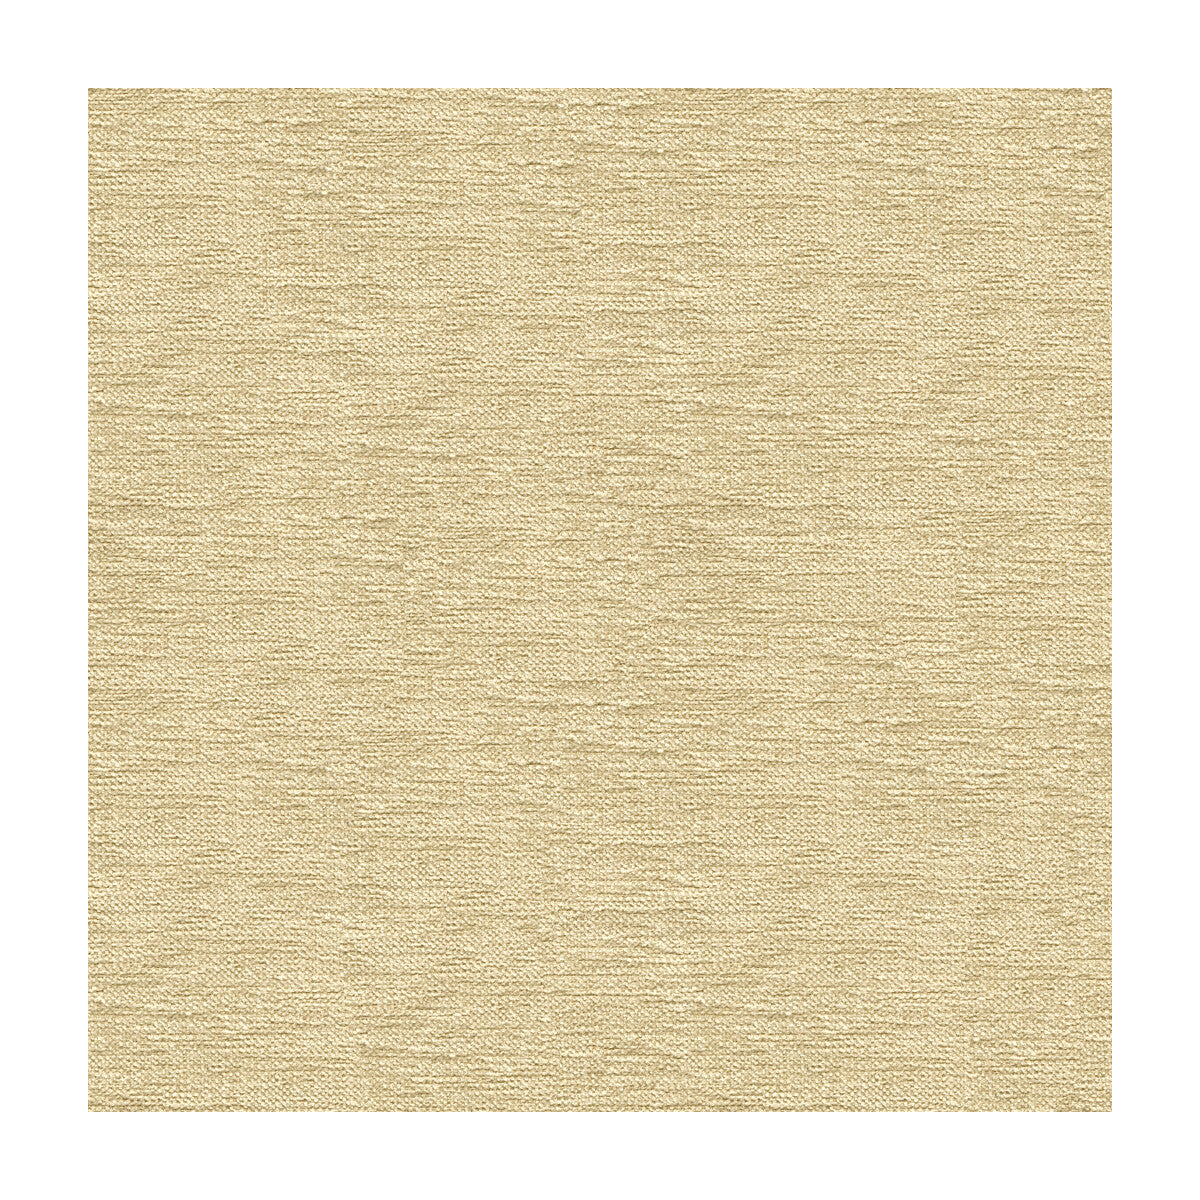 Kravet Smart fabric in 33831-1116 color - pattern 33831.1116.0 - by Kravet Smart in the Performance Crypton Home collection